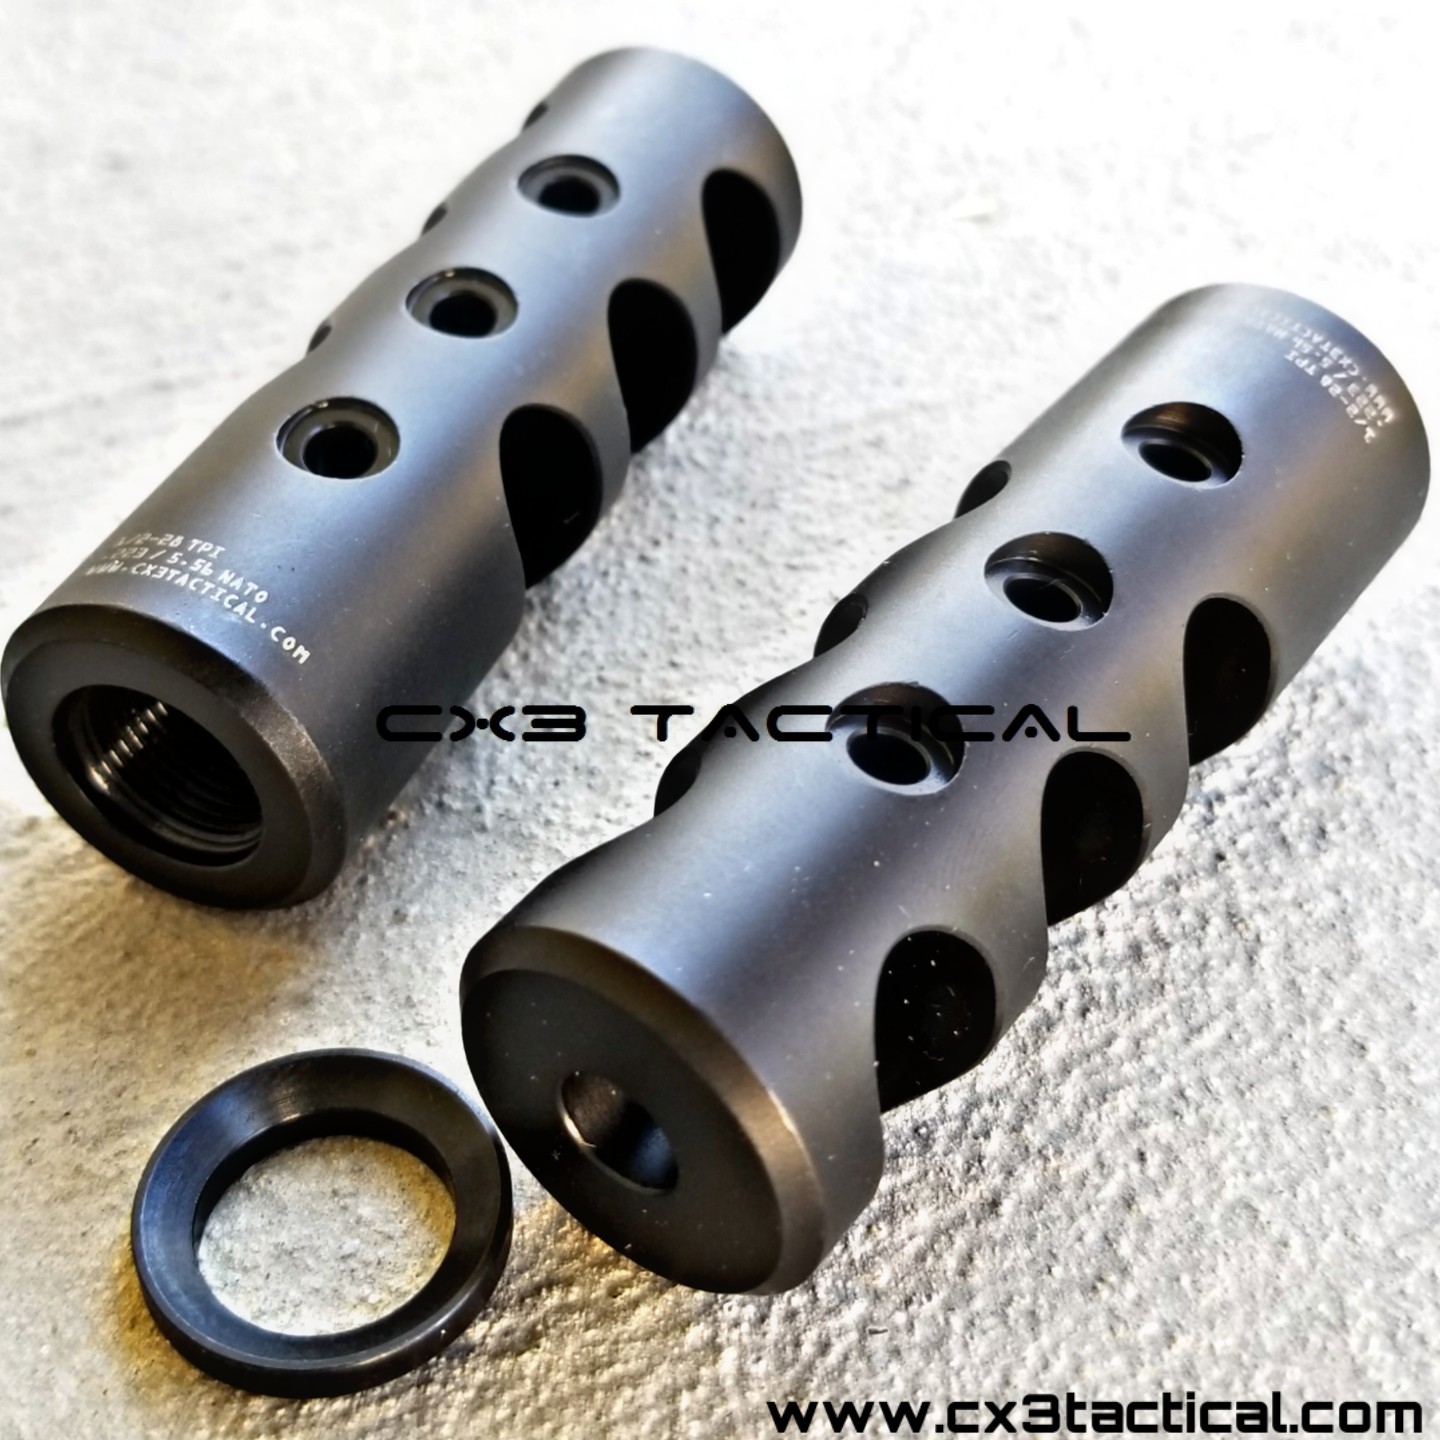 .223 Muzzle Brake 1/2x28 Thread Steel Tactical Muzzle Device with Jam Nut 